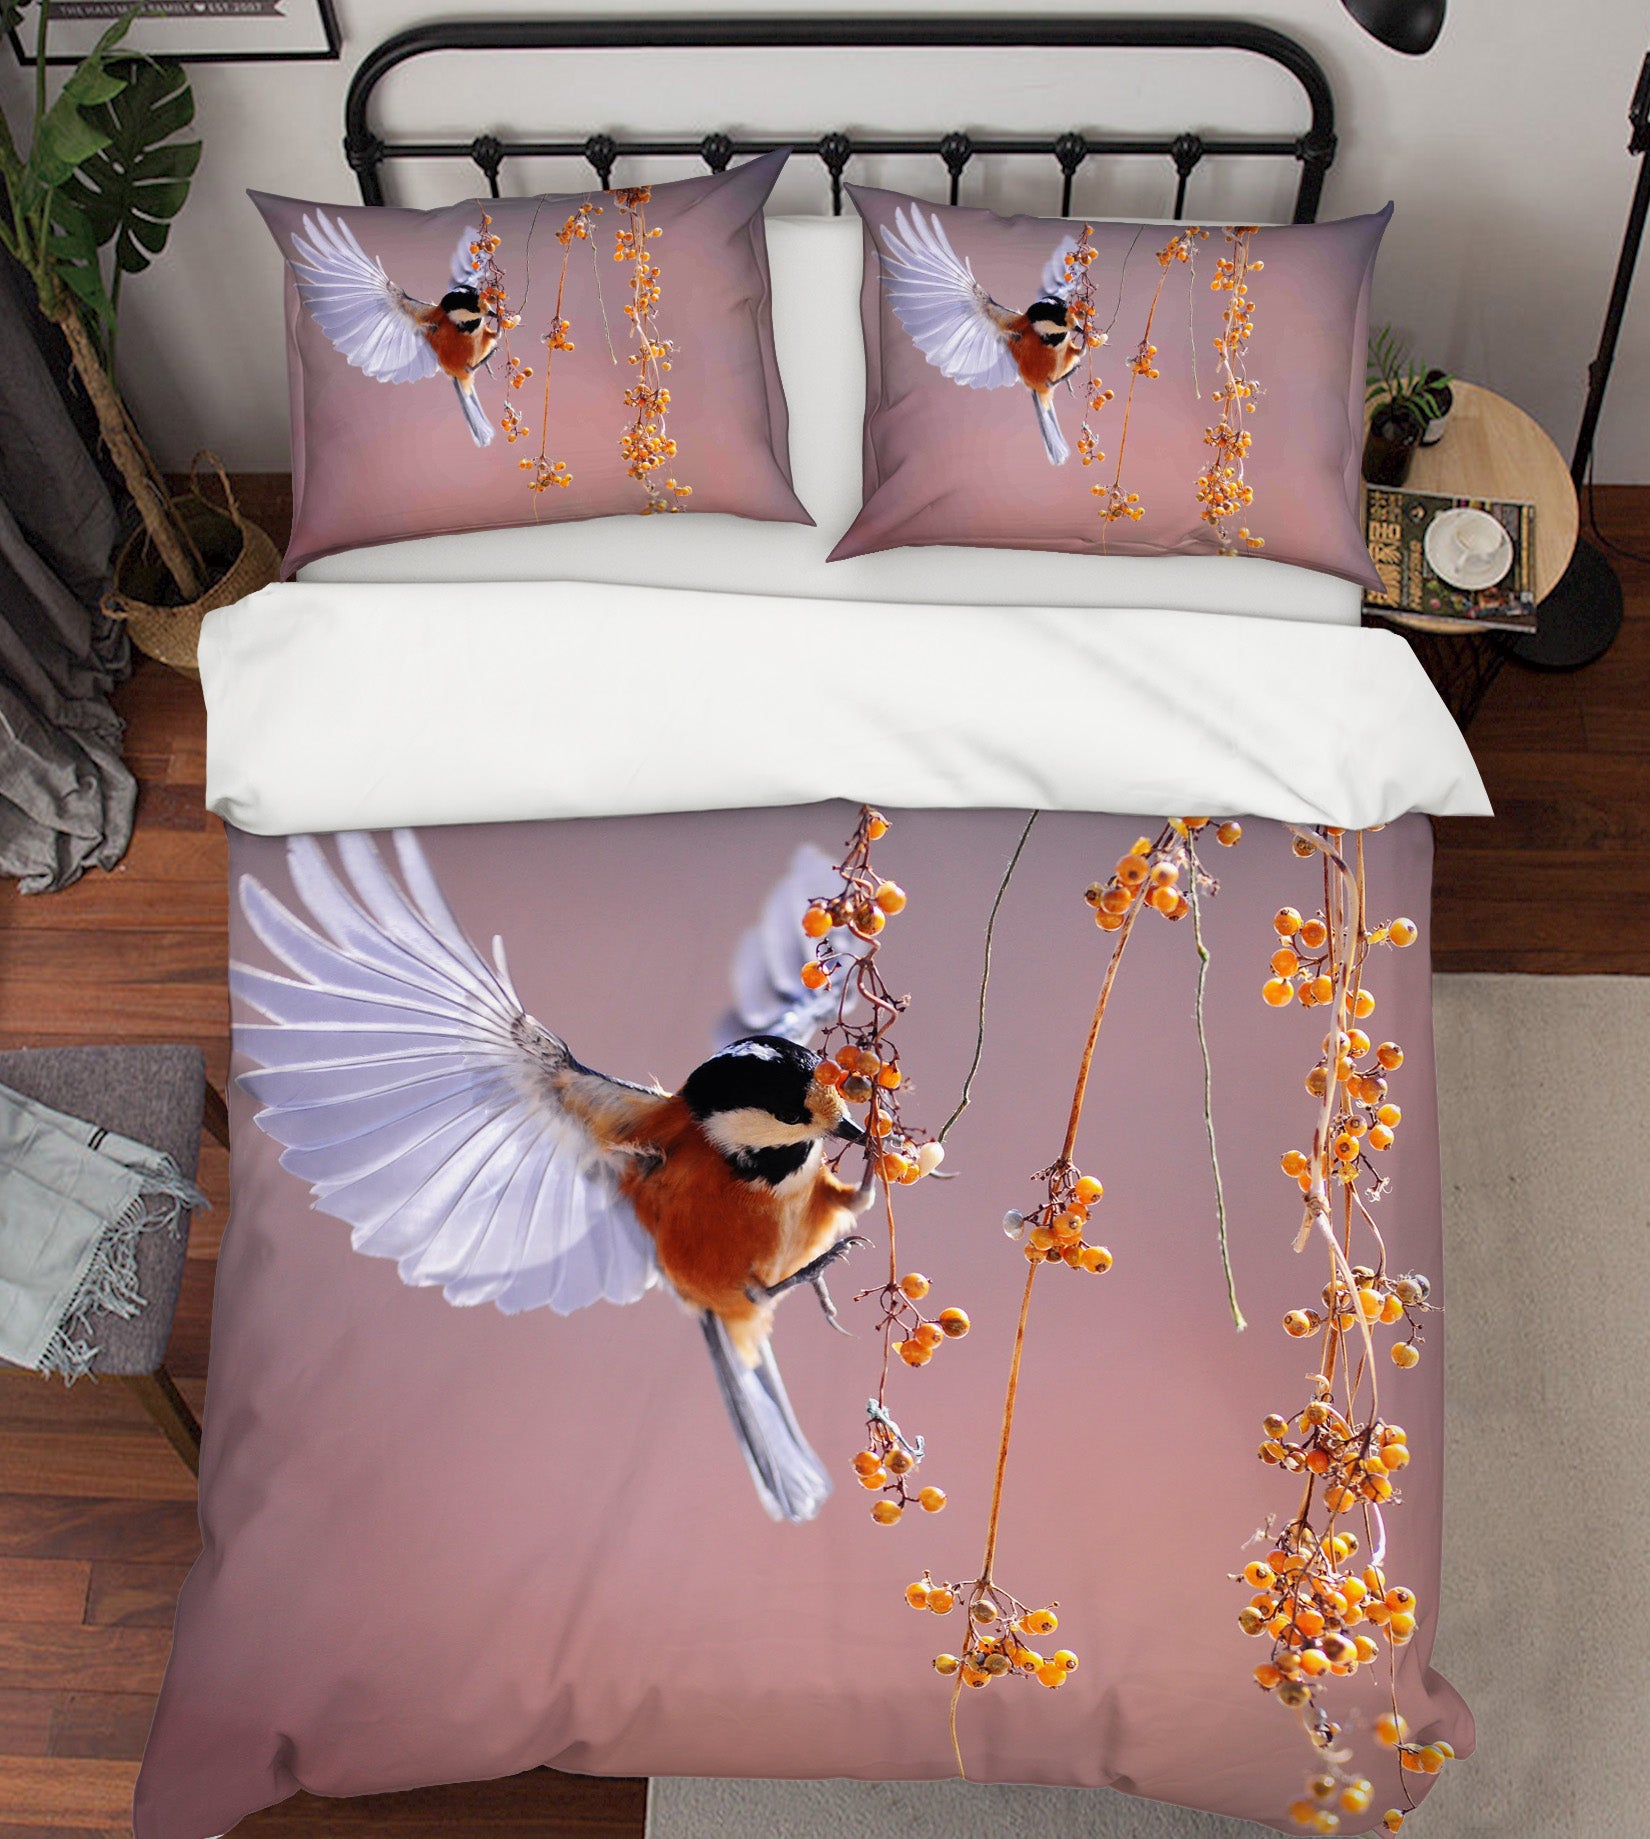 3D Kingfisher Leaf 023 Bed Pillowcases Quilt